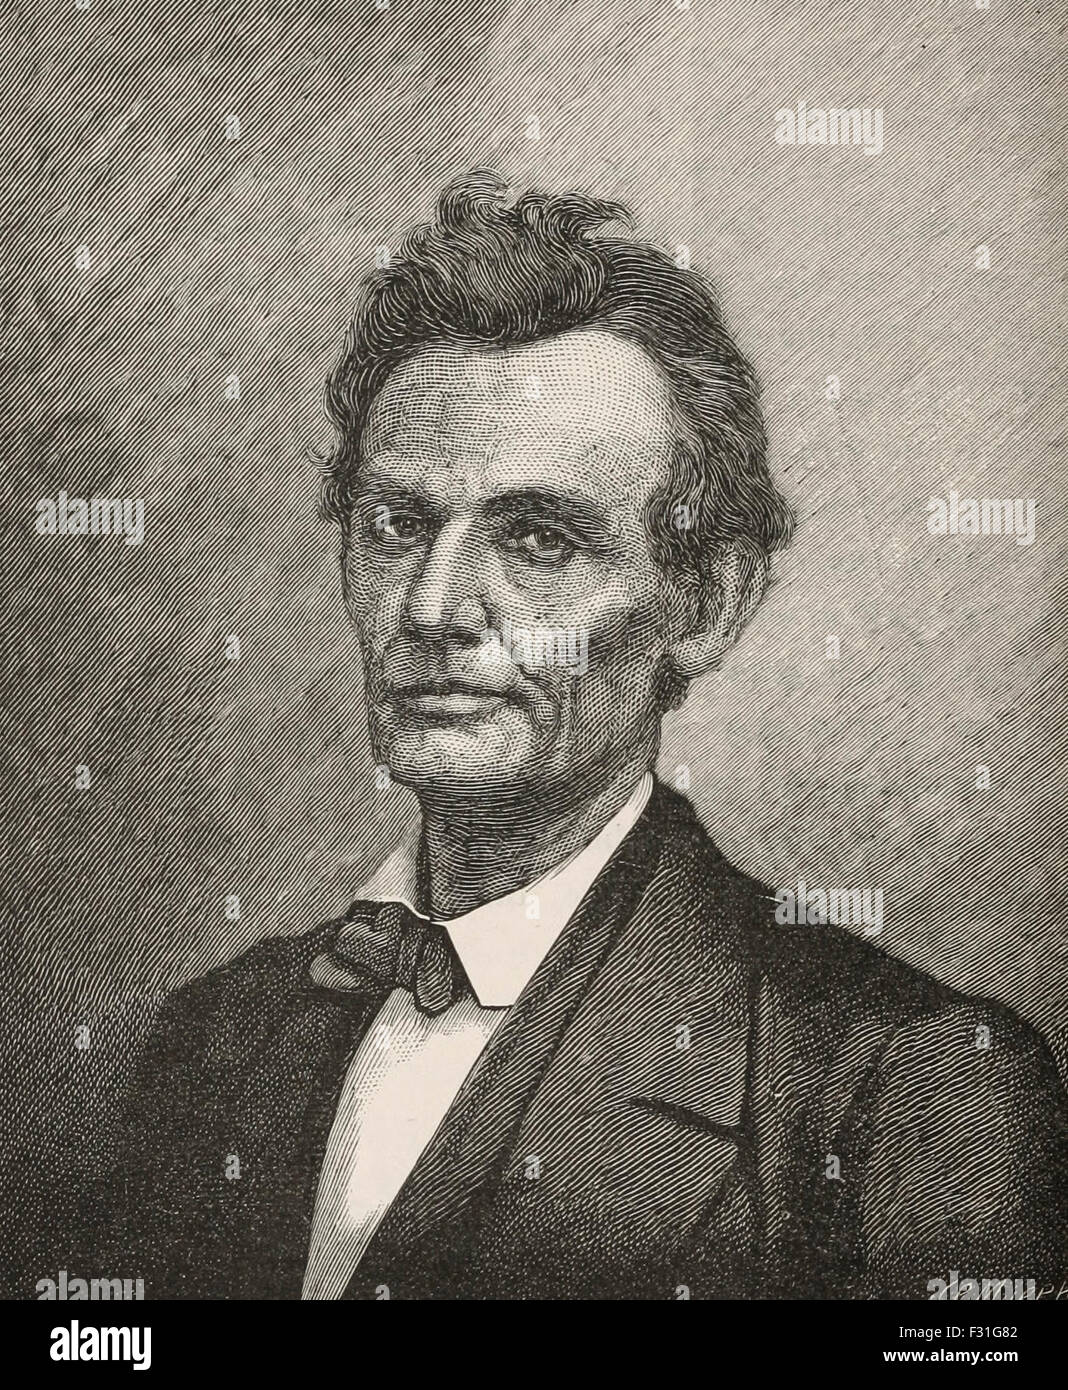 Abraham Lincoln - The First Republican President of the United States Stock Photo